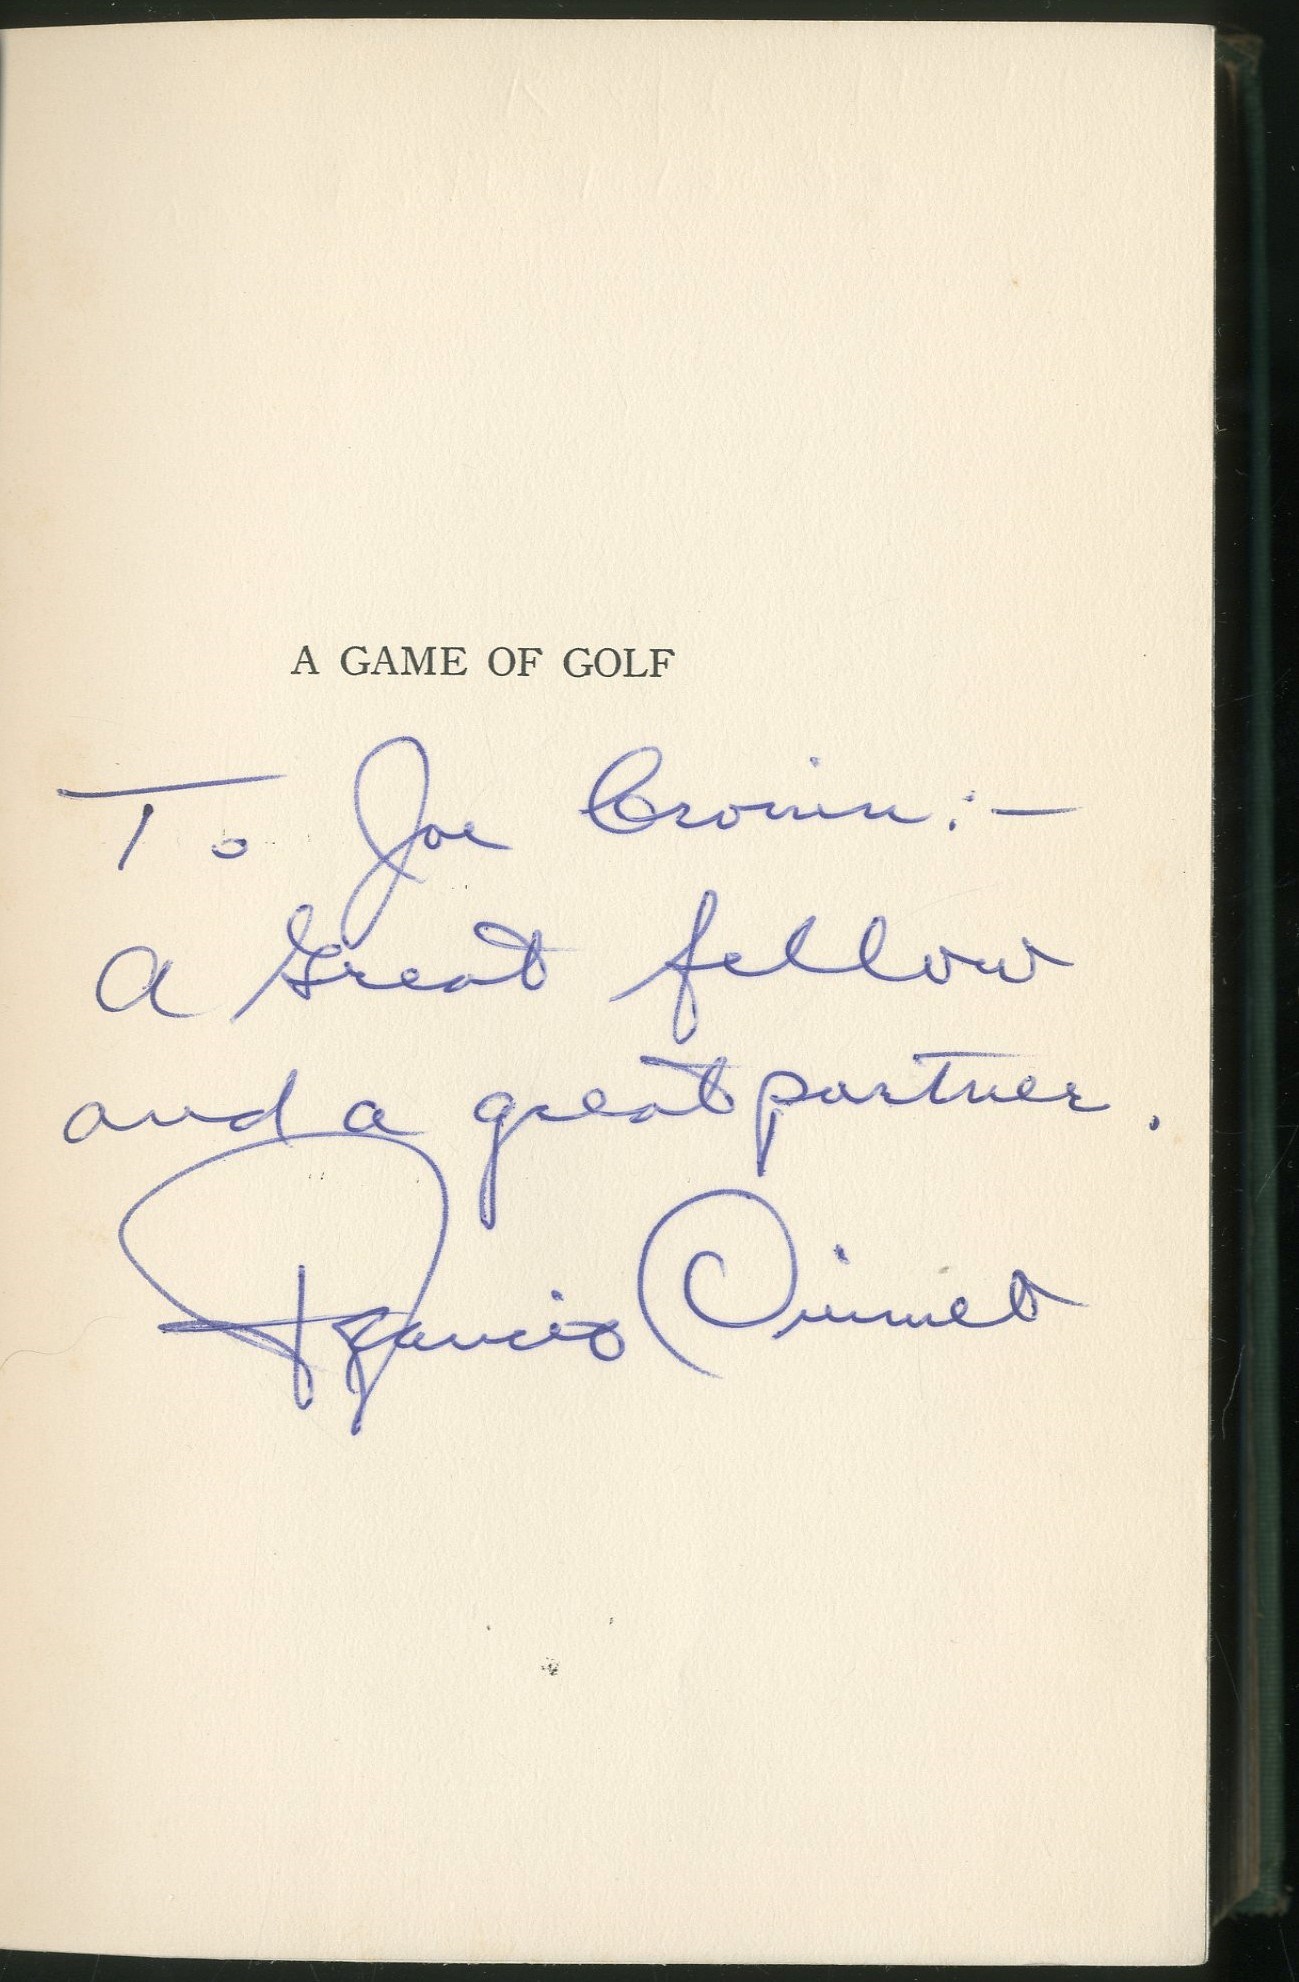 - 1932 "A Game of Golf" Book Signed by Francis Ouimet to Joe Cronin (PSA & SGC)